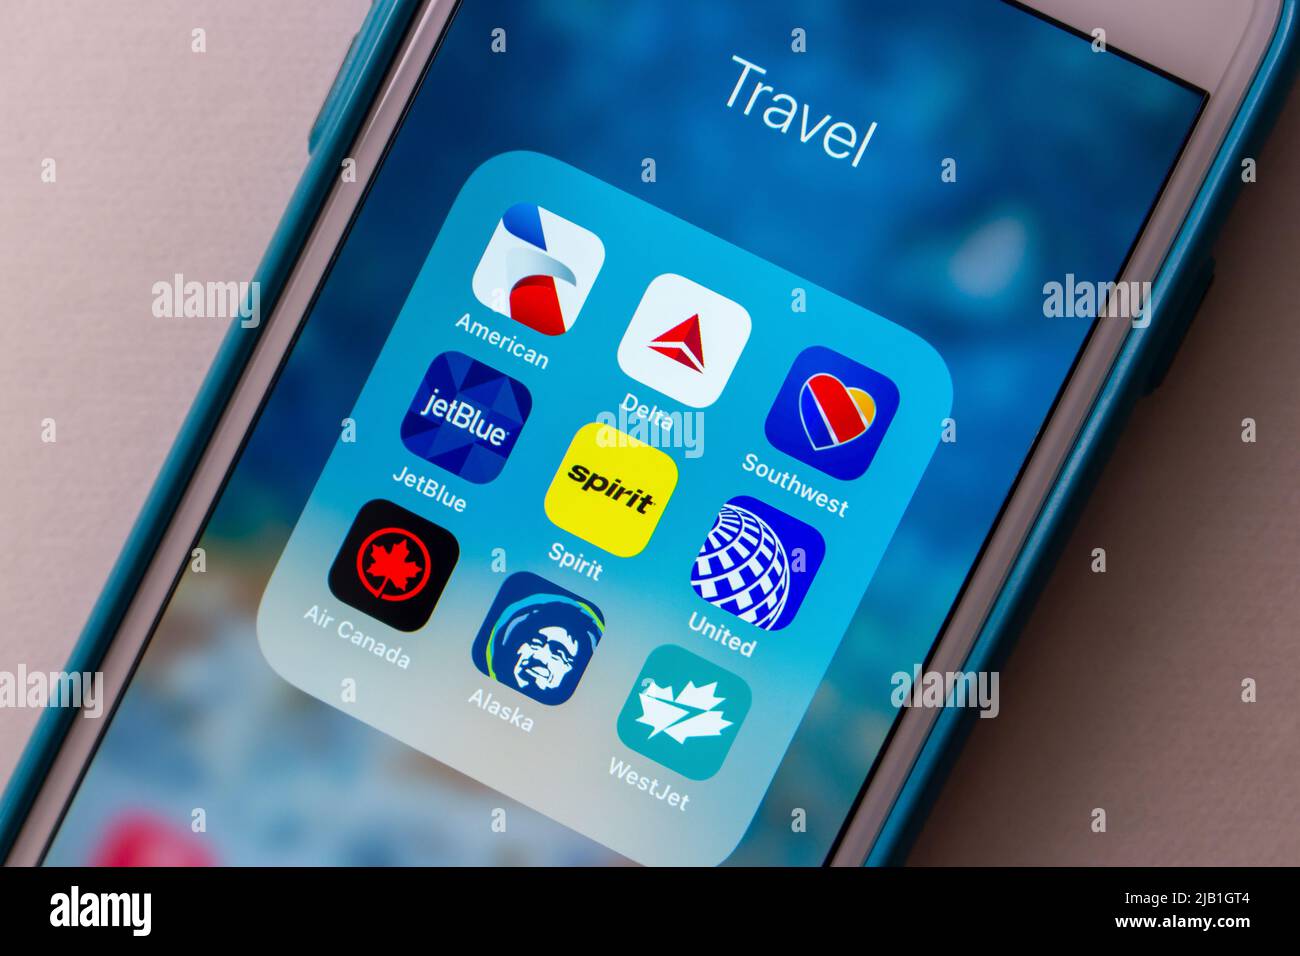 US airline icons on iPhone (American Airlines, Delta, Southwest, United Airlines, Air Canada, Alaska Airlines, JetBlue Airways, Spirit and WestJet). Stock Photo